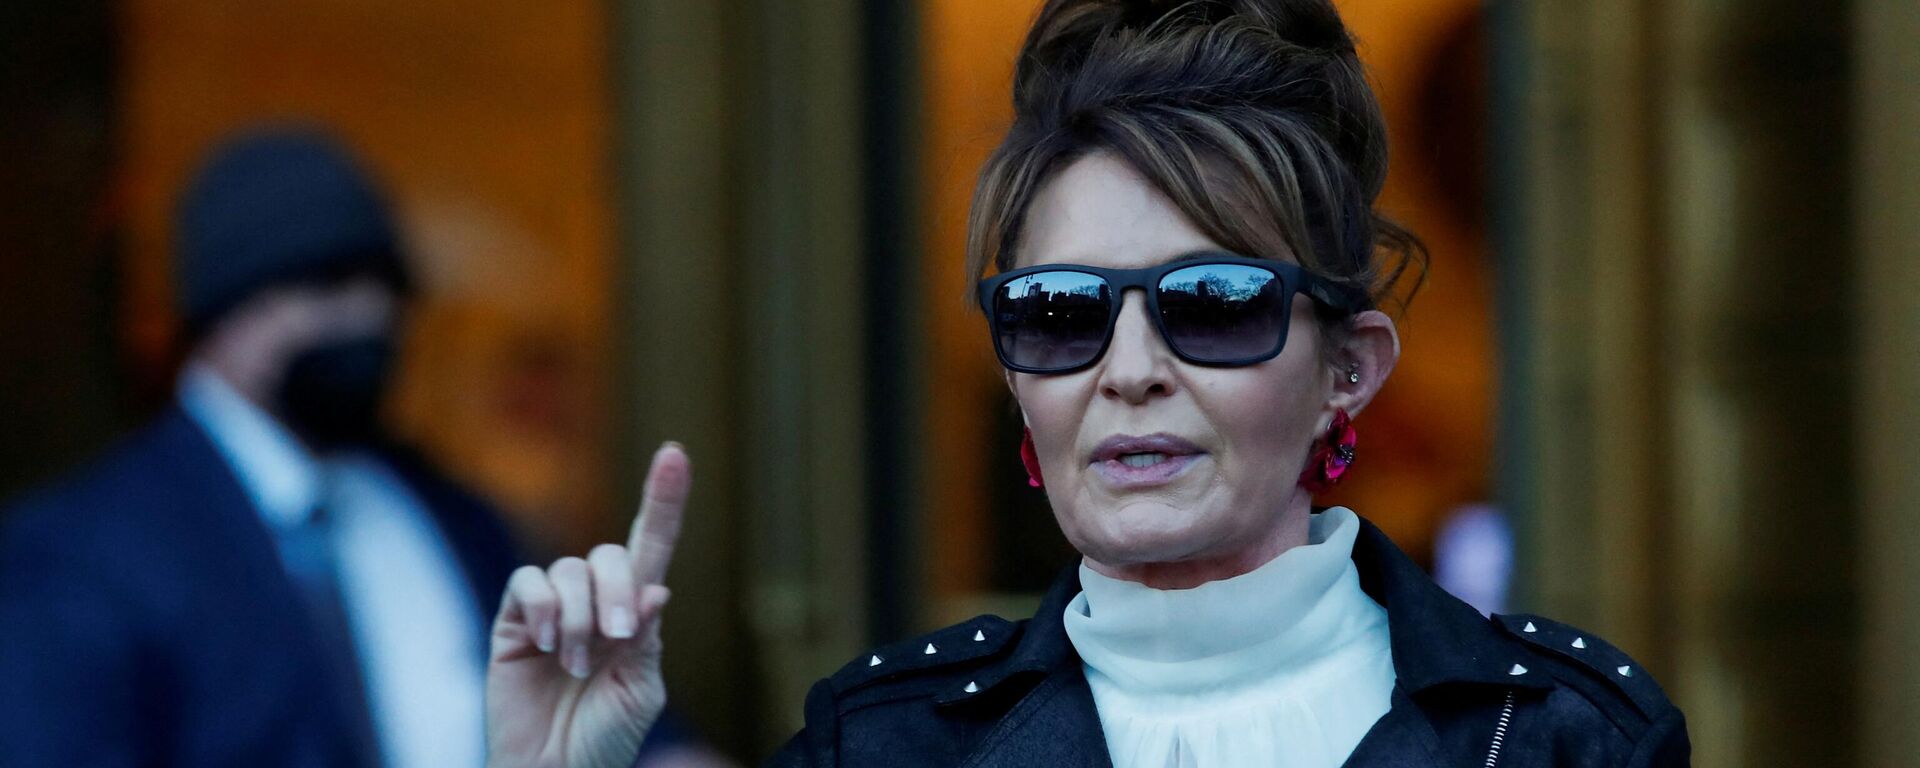 Sarah Palin, 2008 Republican vice presidential candidate and former Alaska governor, speaks to the media as she exits the court during her defamation lawsuit against the New York Times, at the United States Courthouse in the Manhattan borough of New York City, U.S., February 14, 2022. - Sputnik International, 1920, 04.04.2022